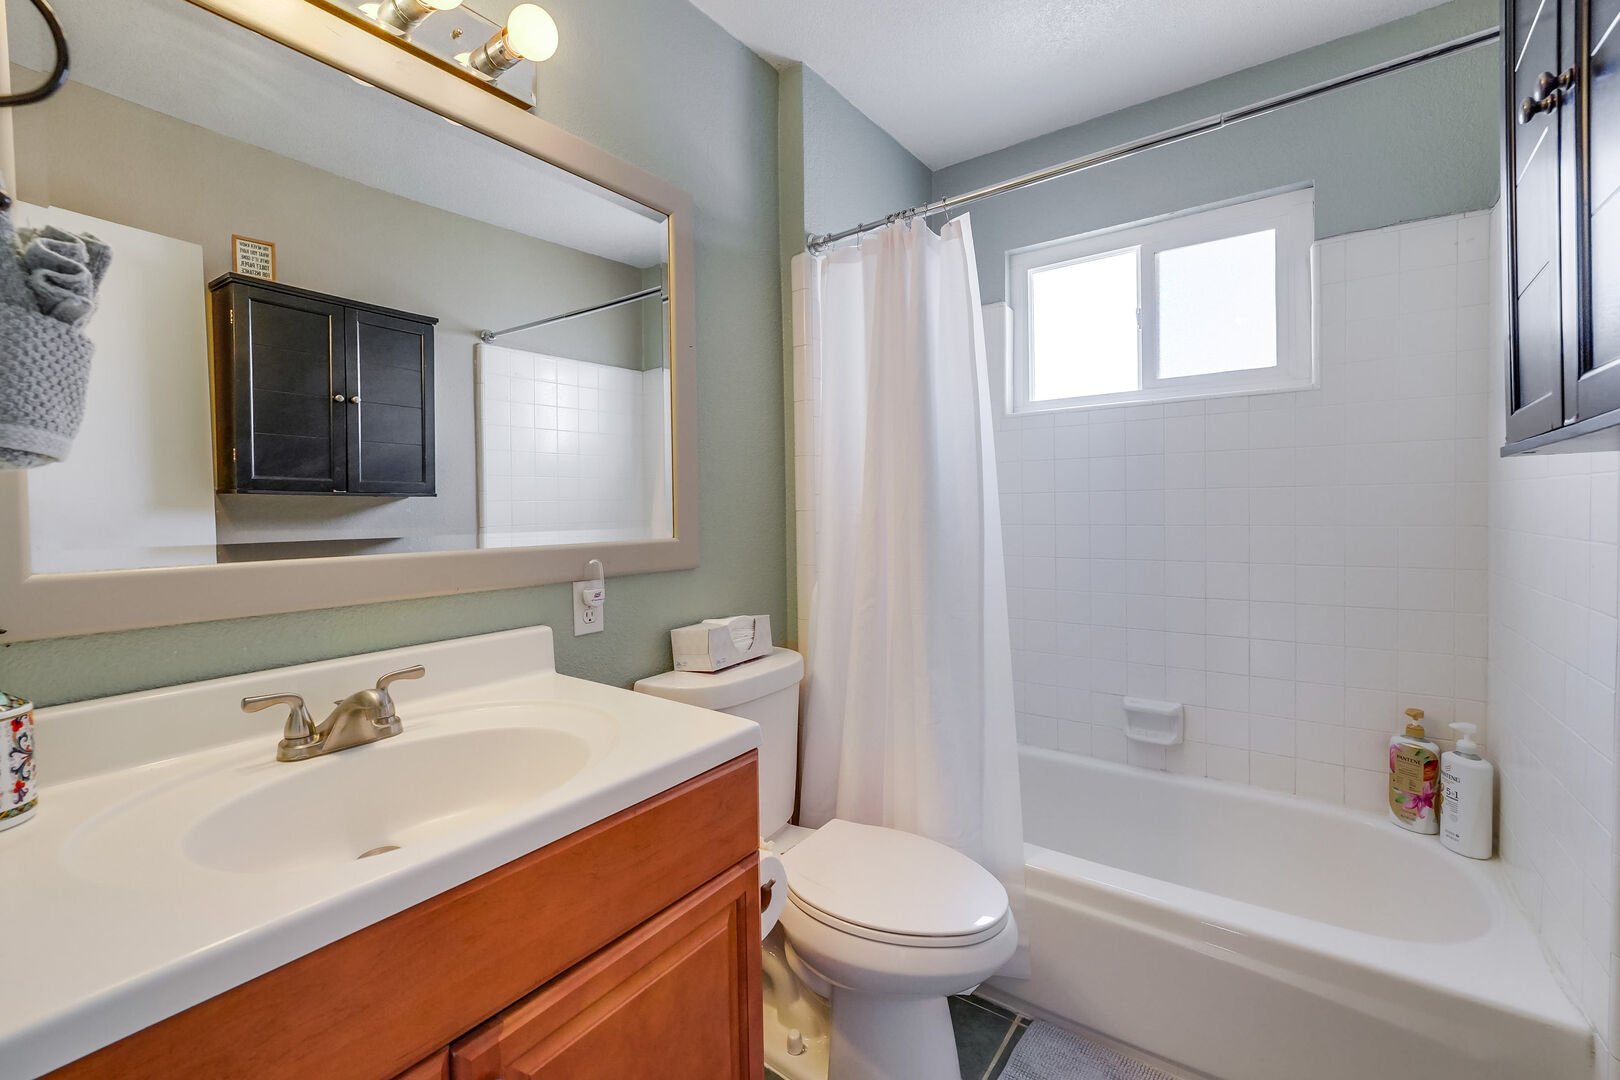 Guest private full bathroom with shower/tub combo, shared between 2 guest rooms